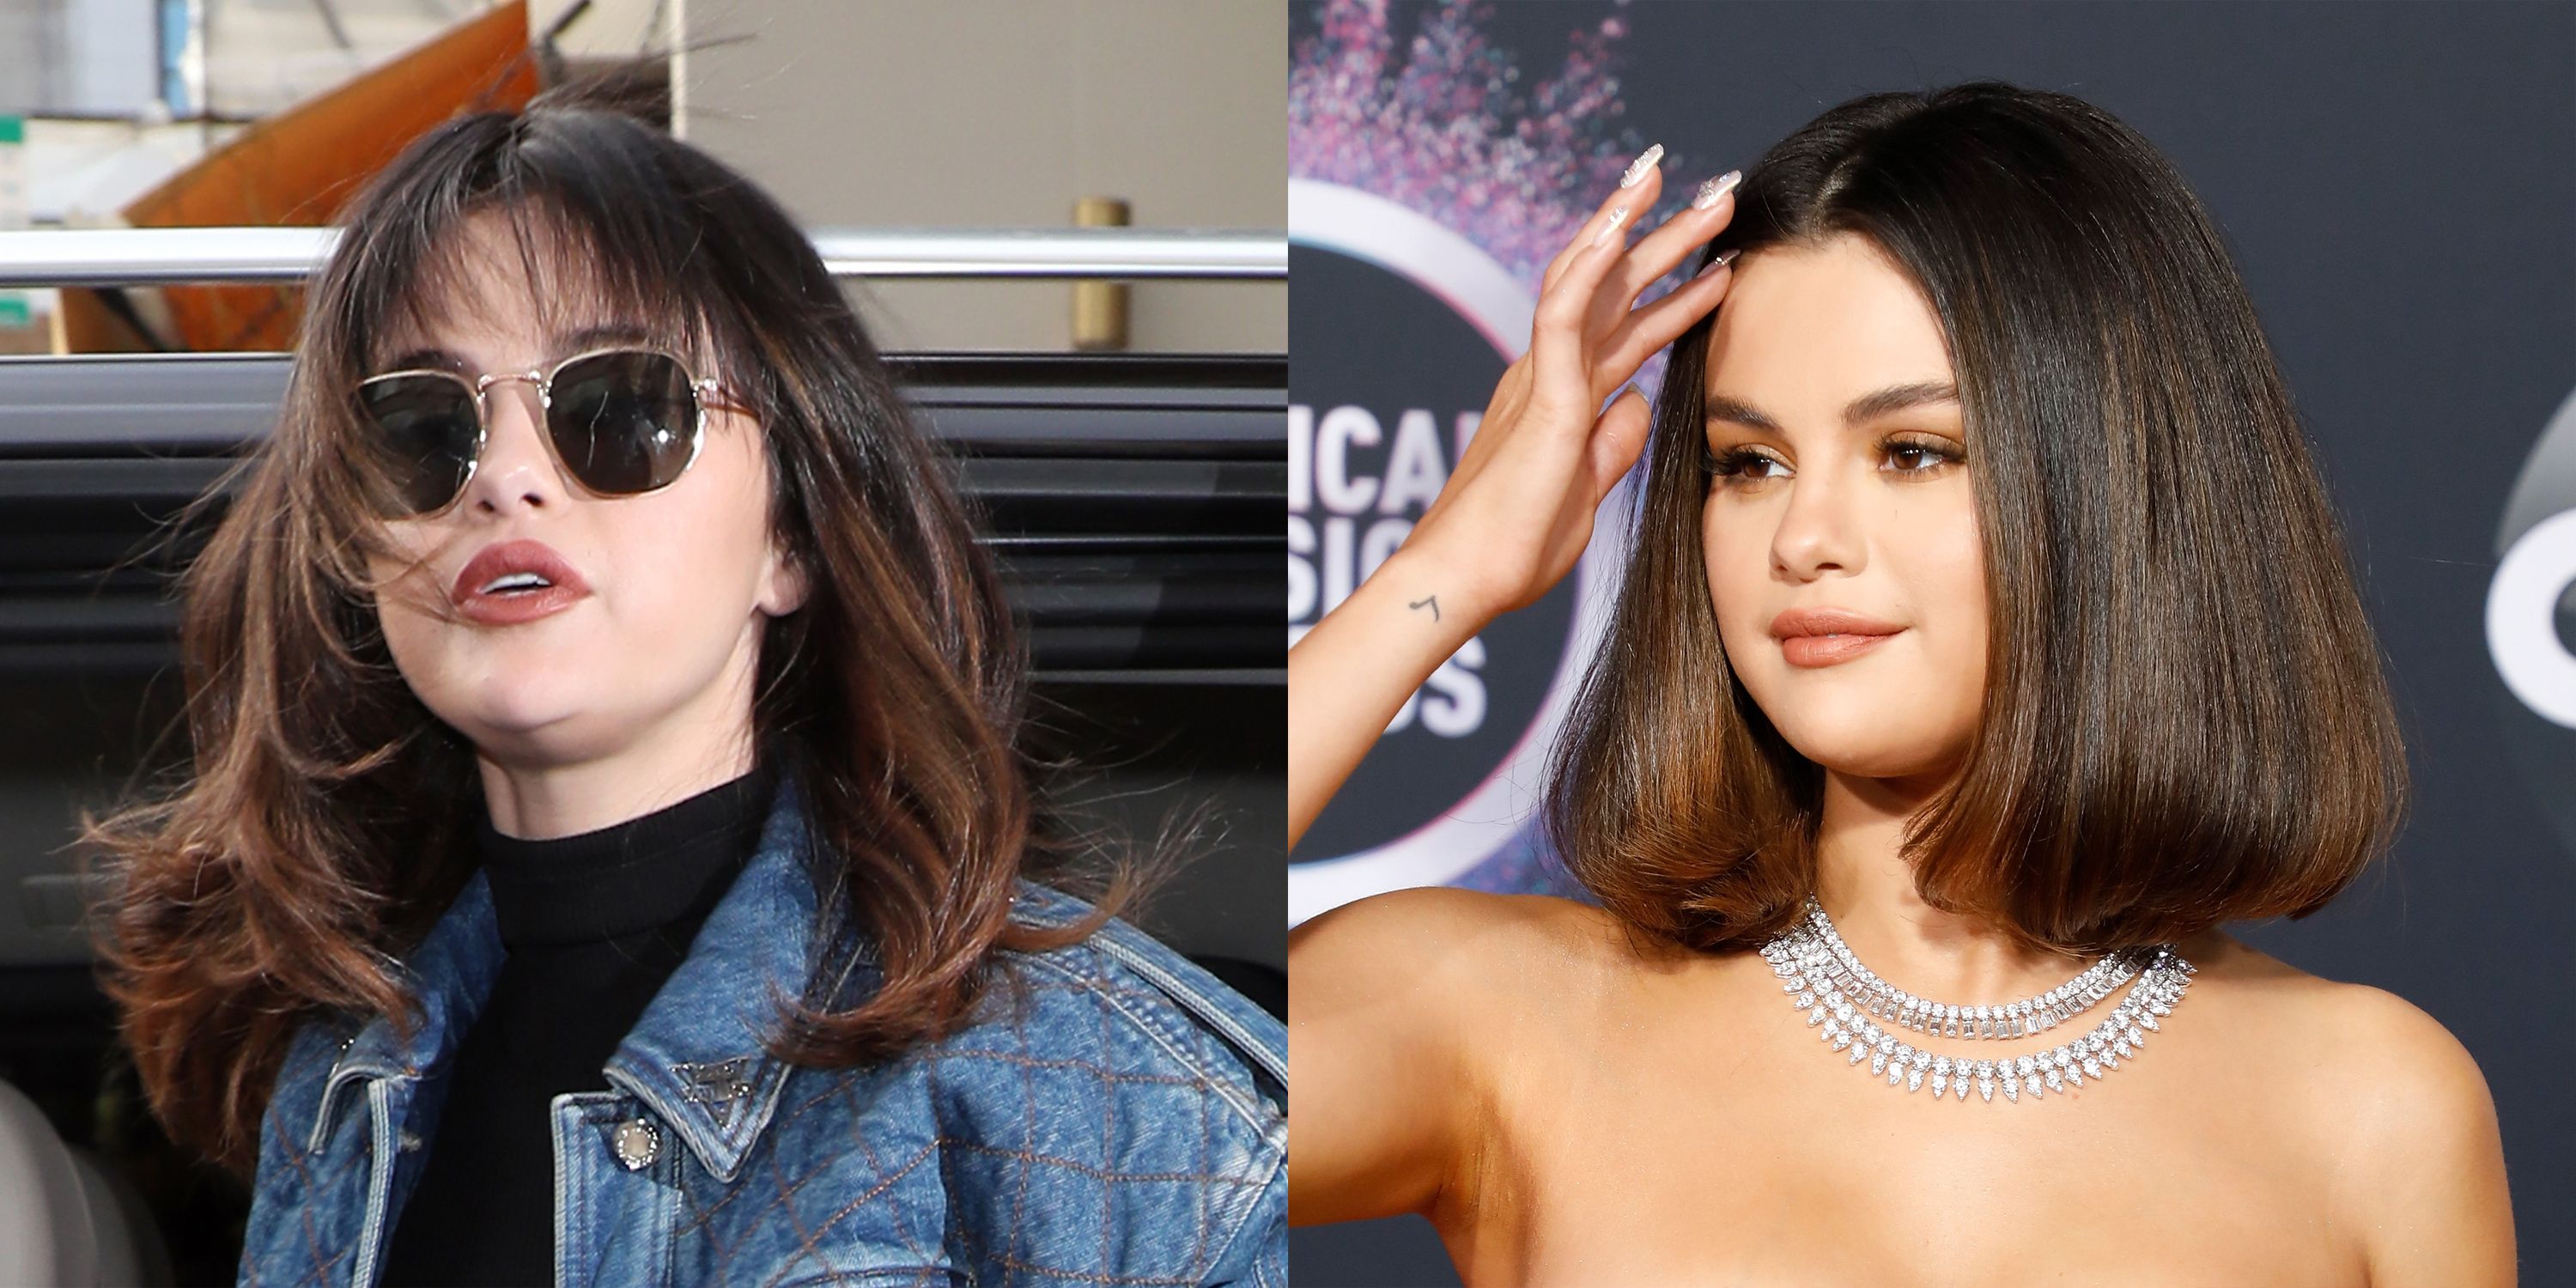 Bangs Vs No Bangs: 23 Celebrity Hairstyles To Rate